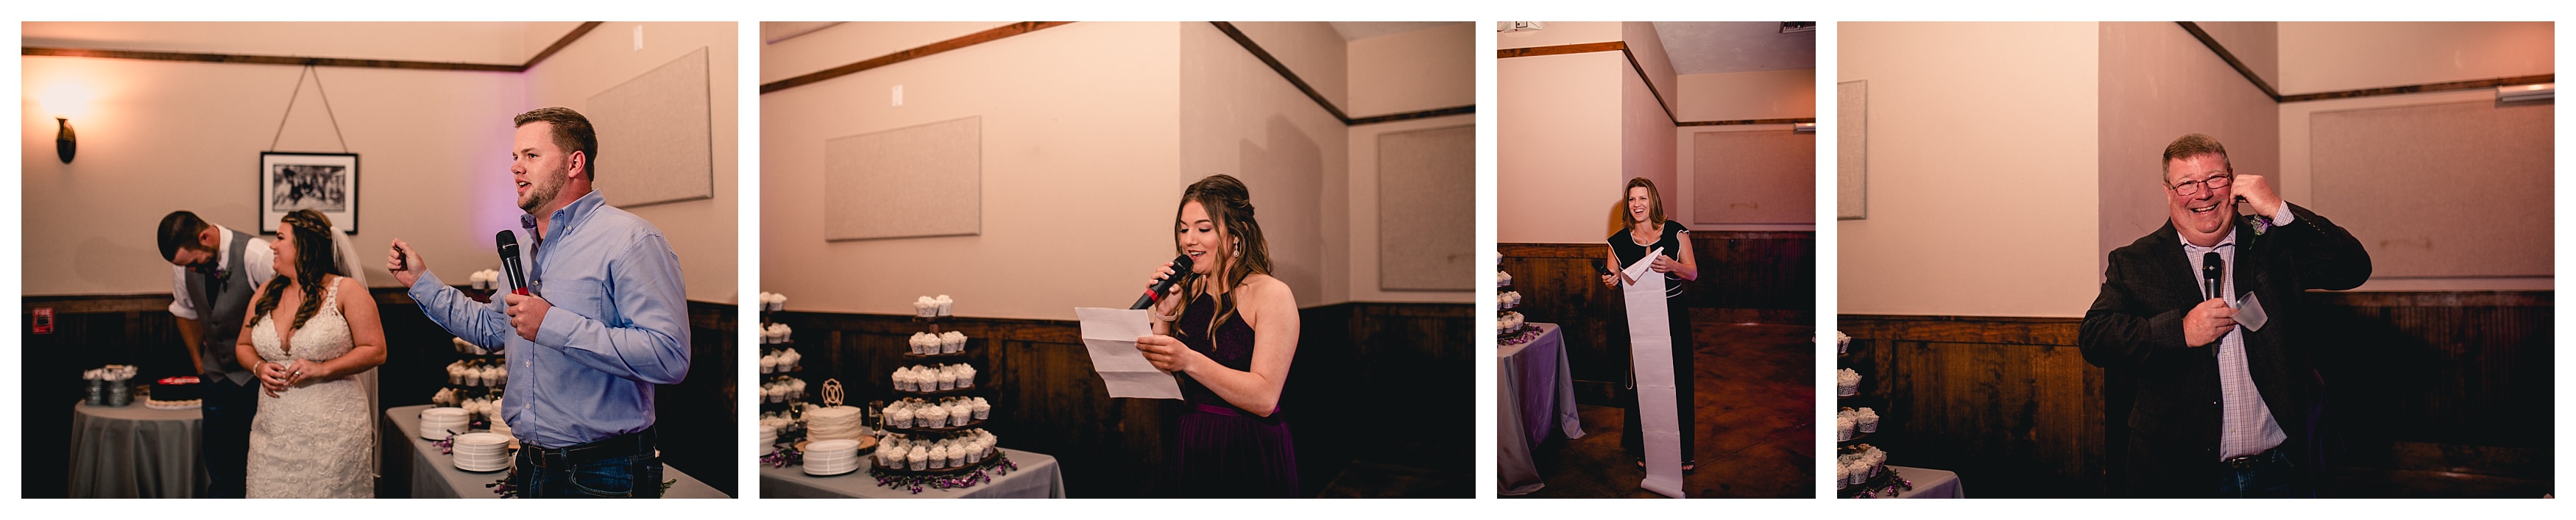 Reception toasts by maid of honor, best man, and bride's aunt and father. Shelly Williams Photography